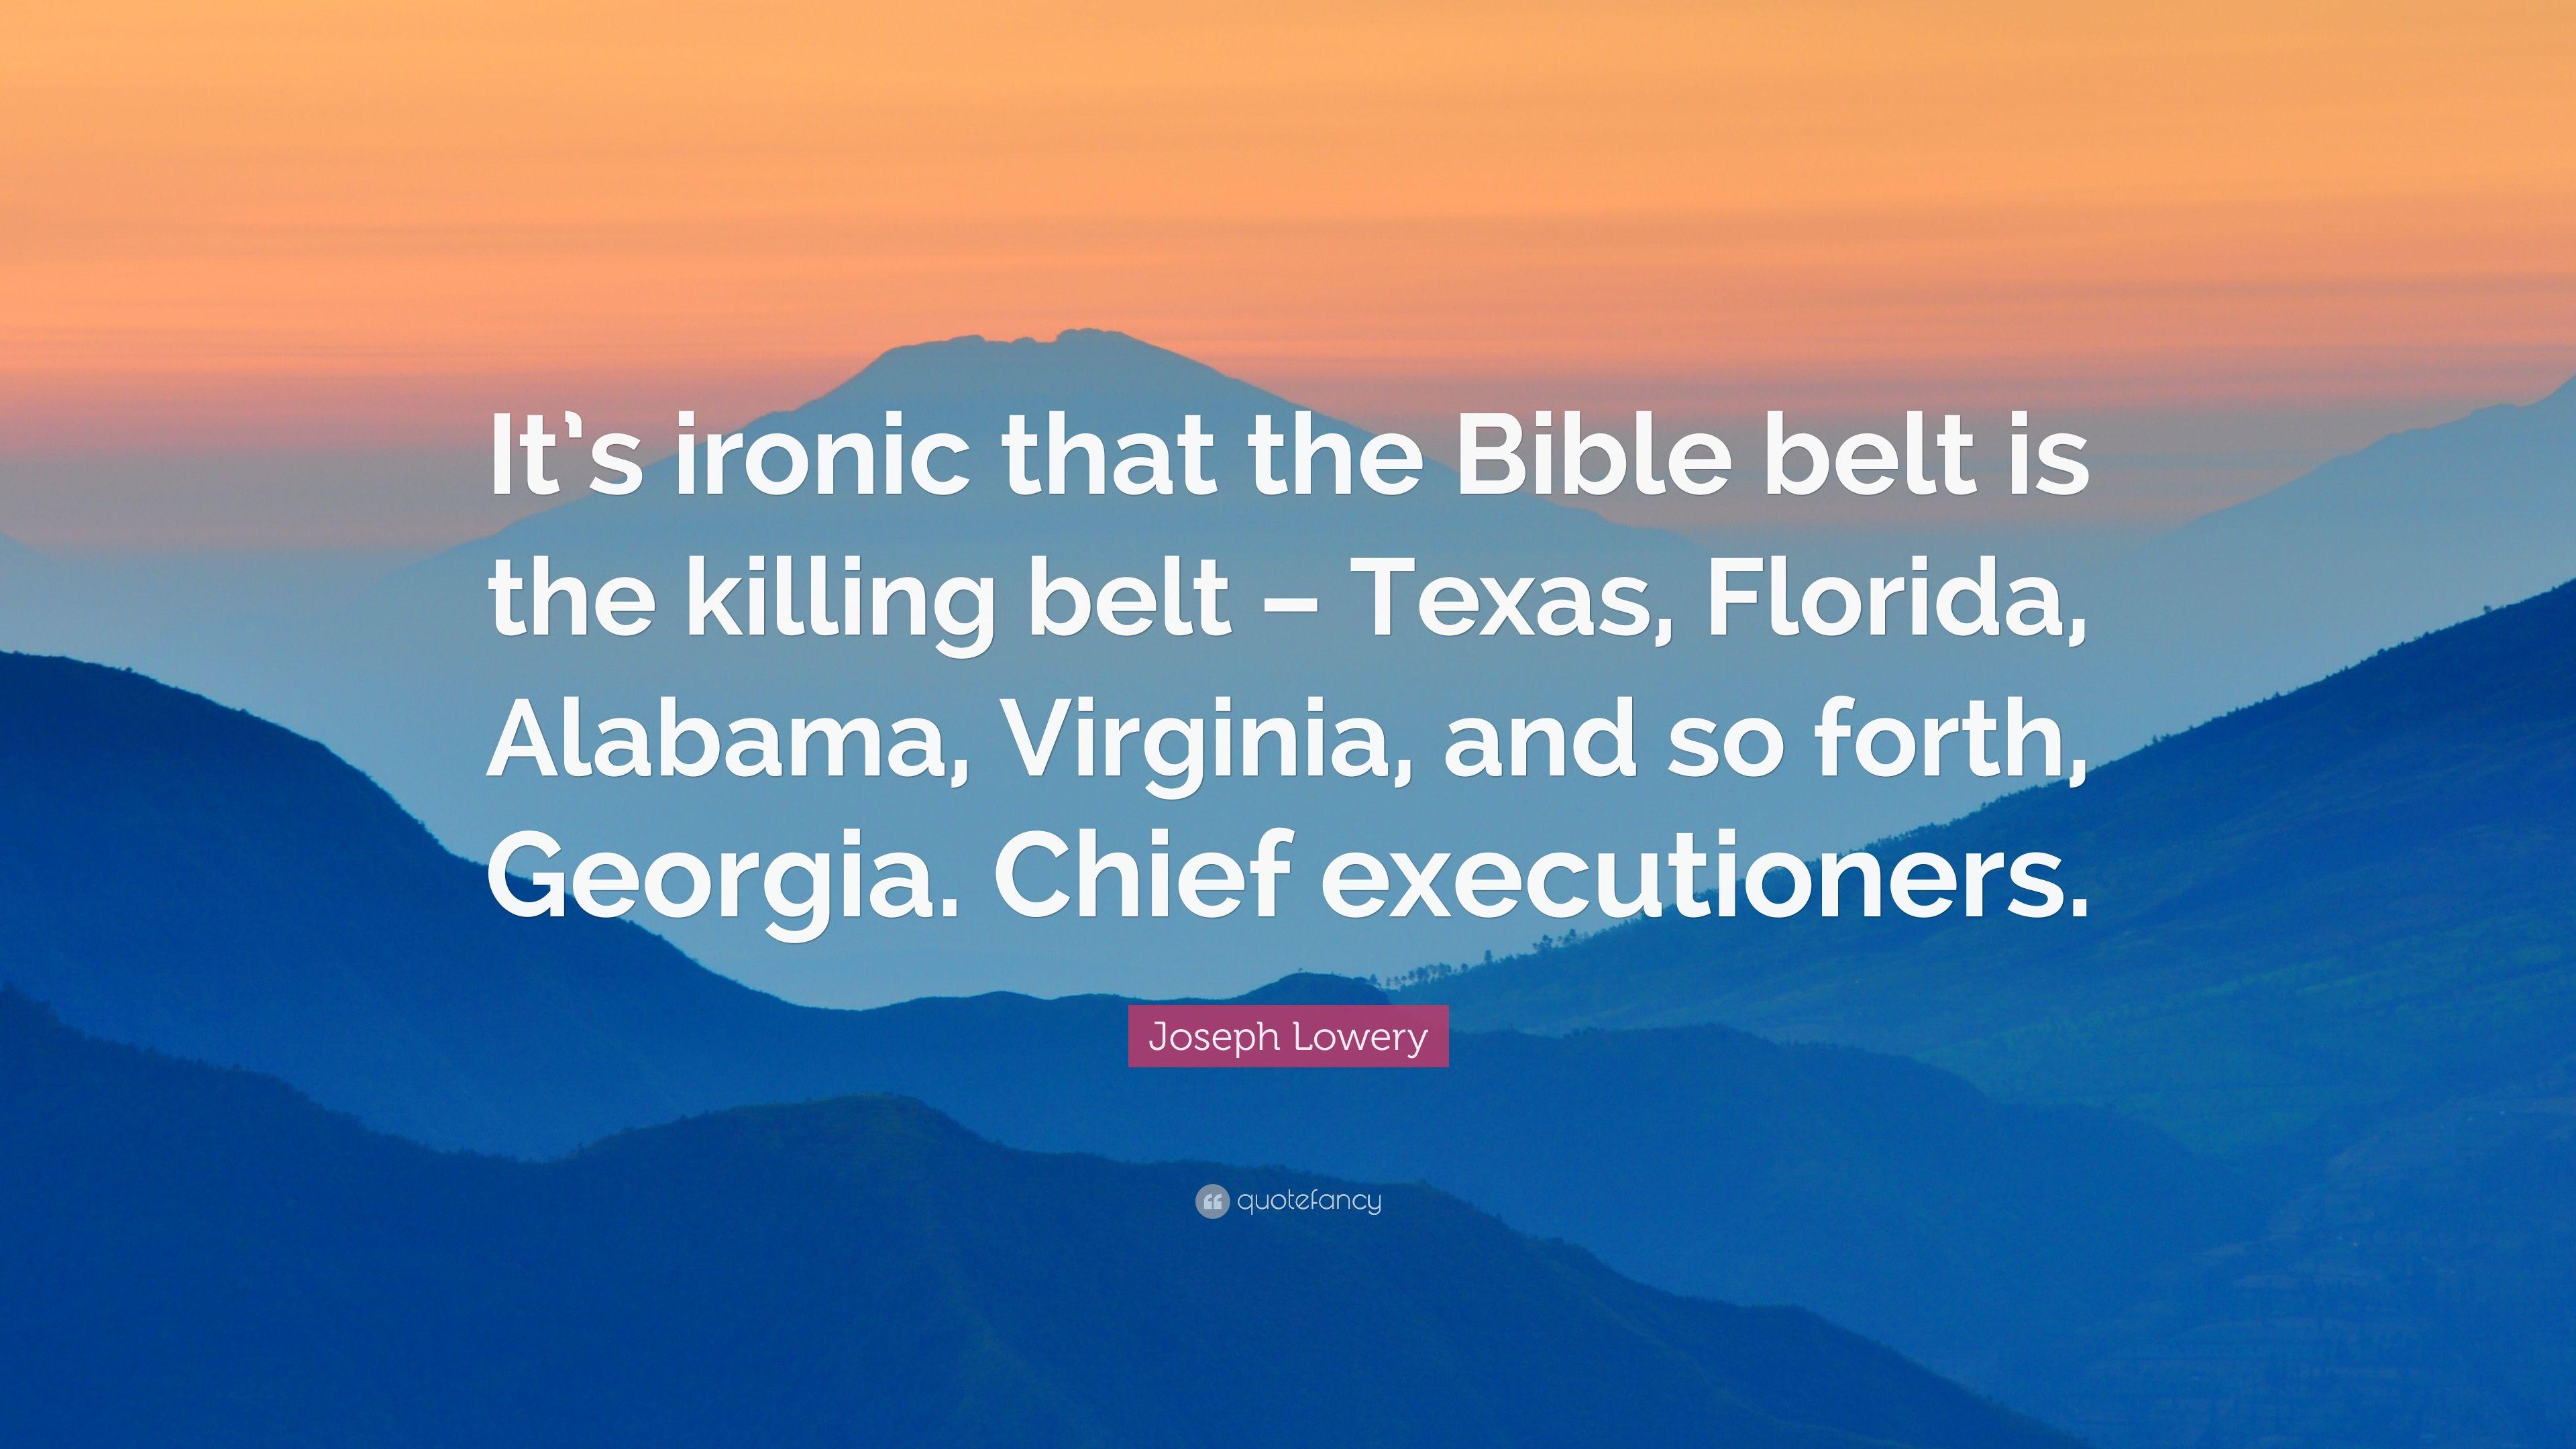 Joseph Lowery Quote: “It's ironic that the Bible belt is the killing